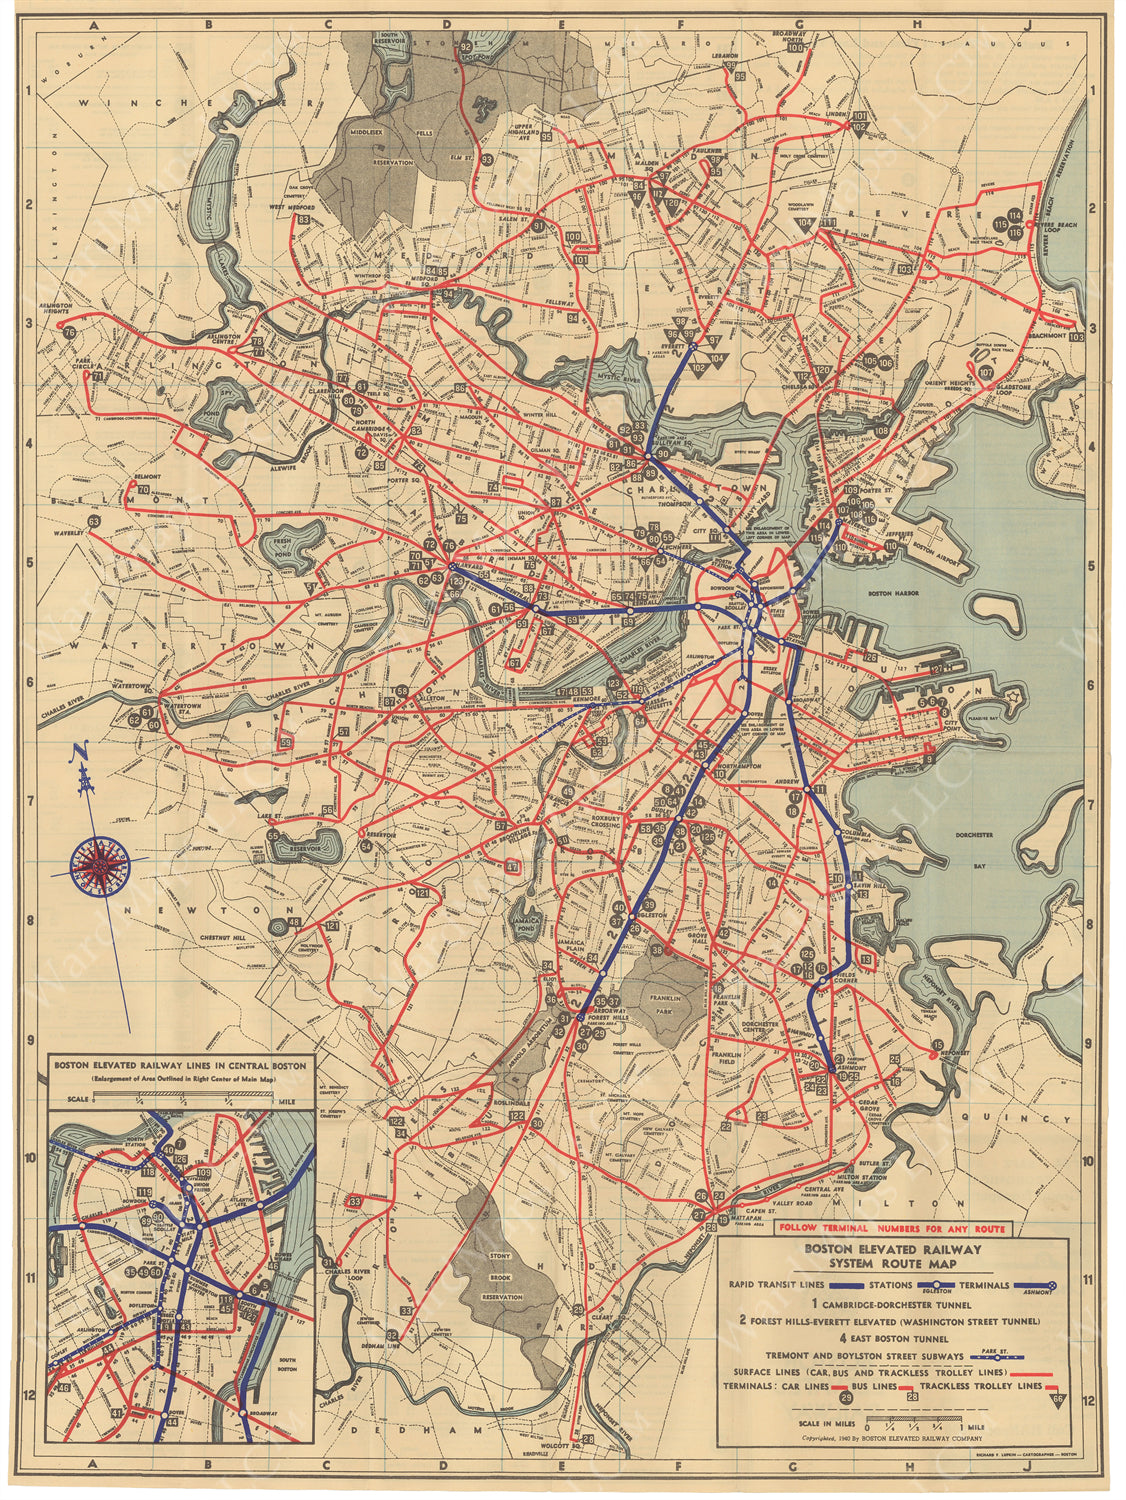 Boston Elevated Railway Co. (Massachusetts) System Route Map #4 1940